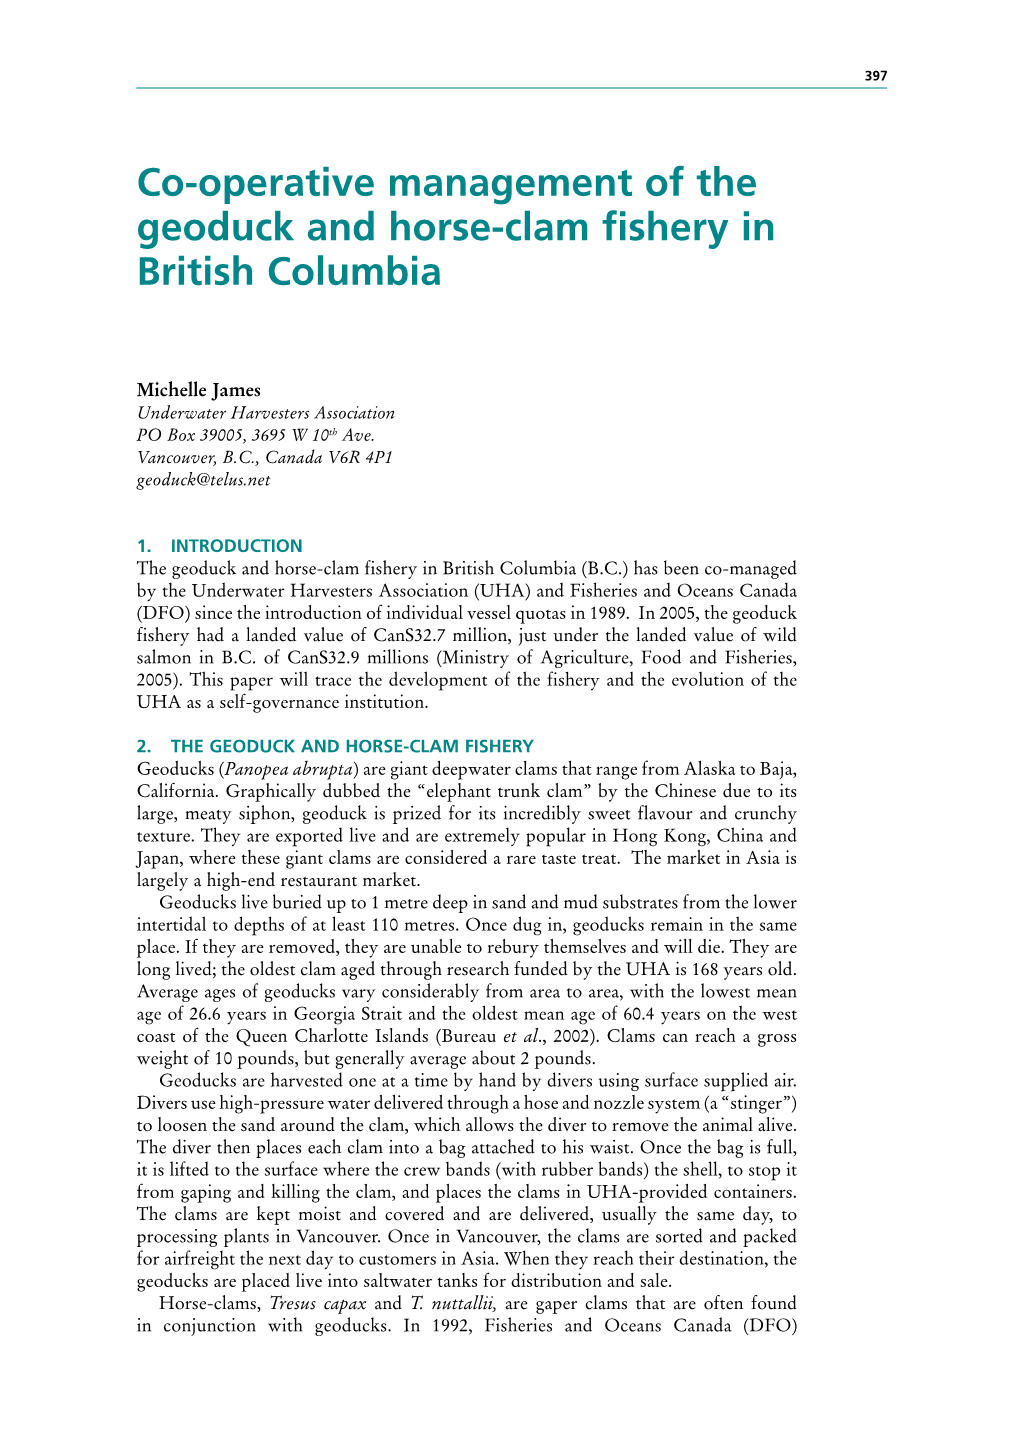 Co-Operative Management of the Geoduck and Horse-Clam Fishery in British Columbia